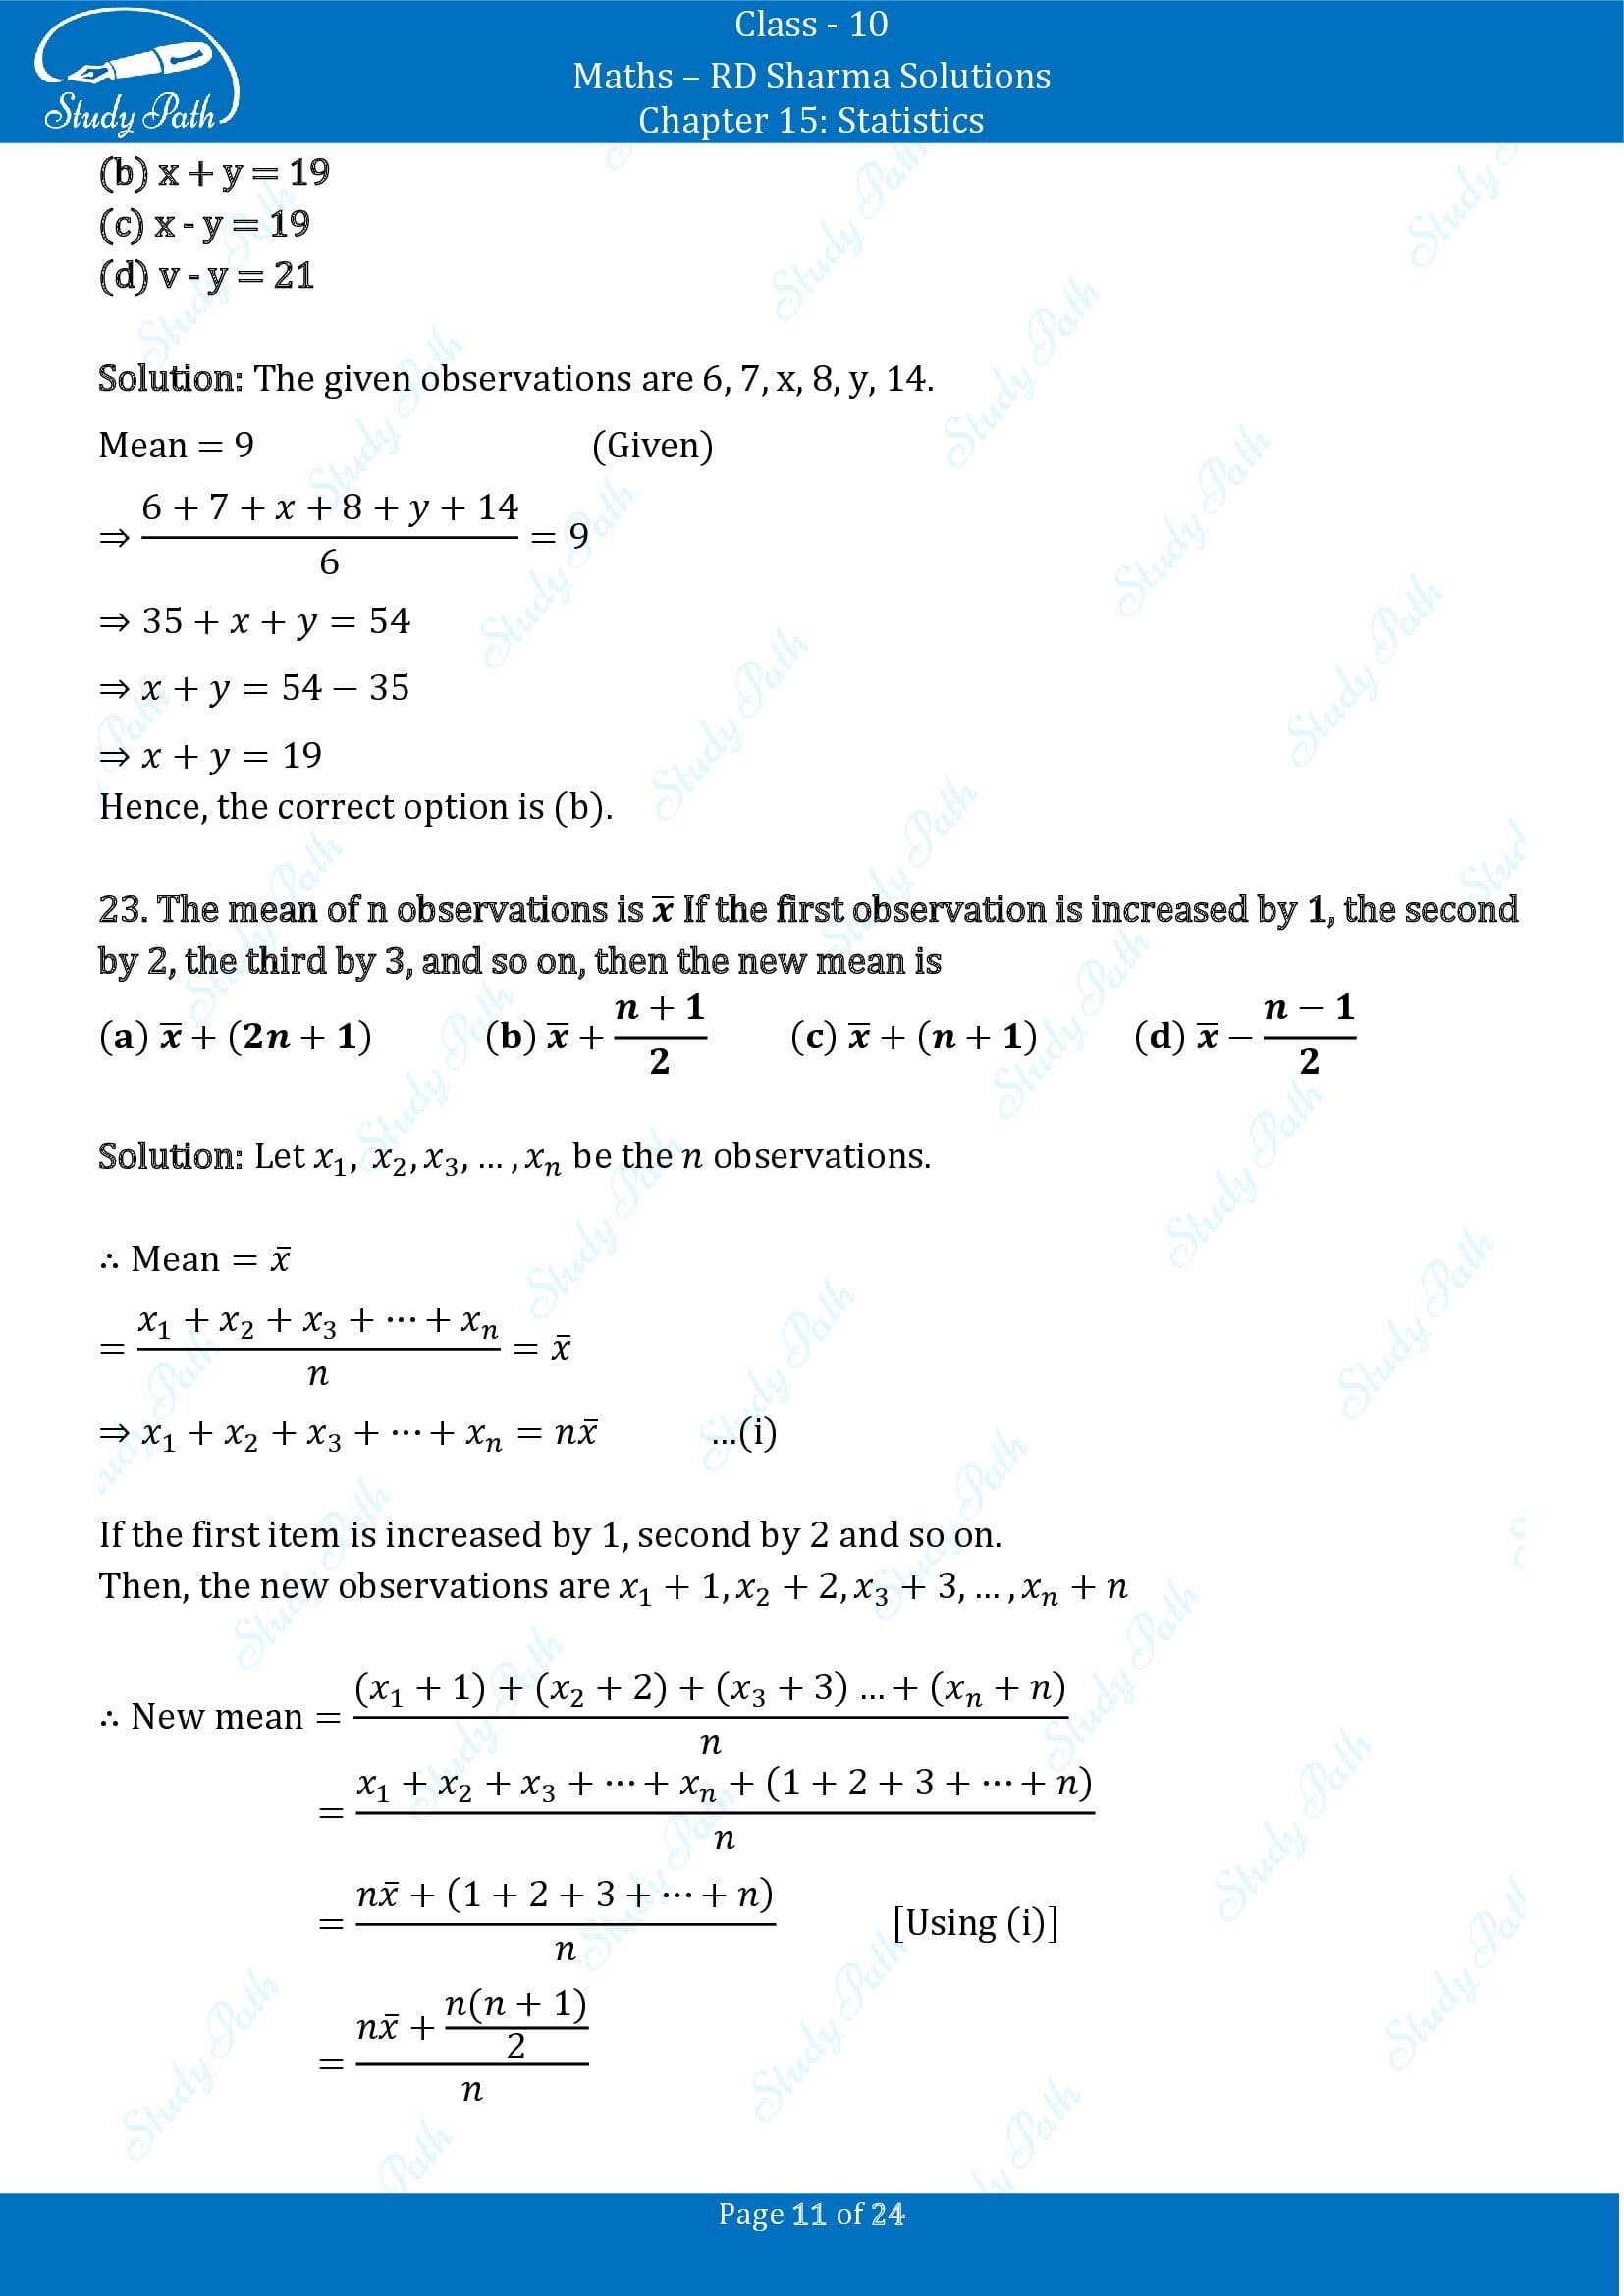 RD Sharma Solutions Class 10 Chapter 15 Statistics Multiple Choice Question MCQs 00011